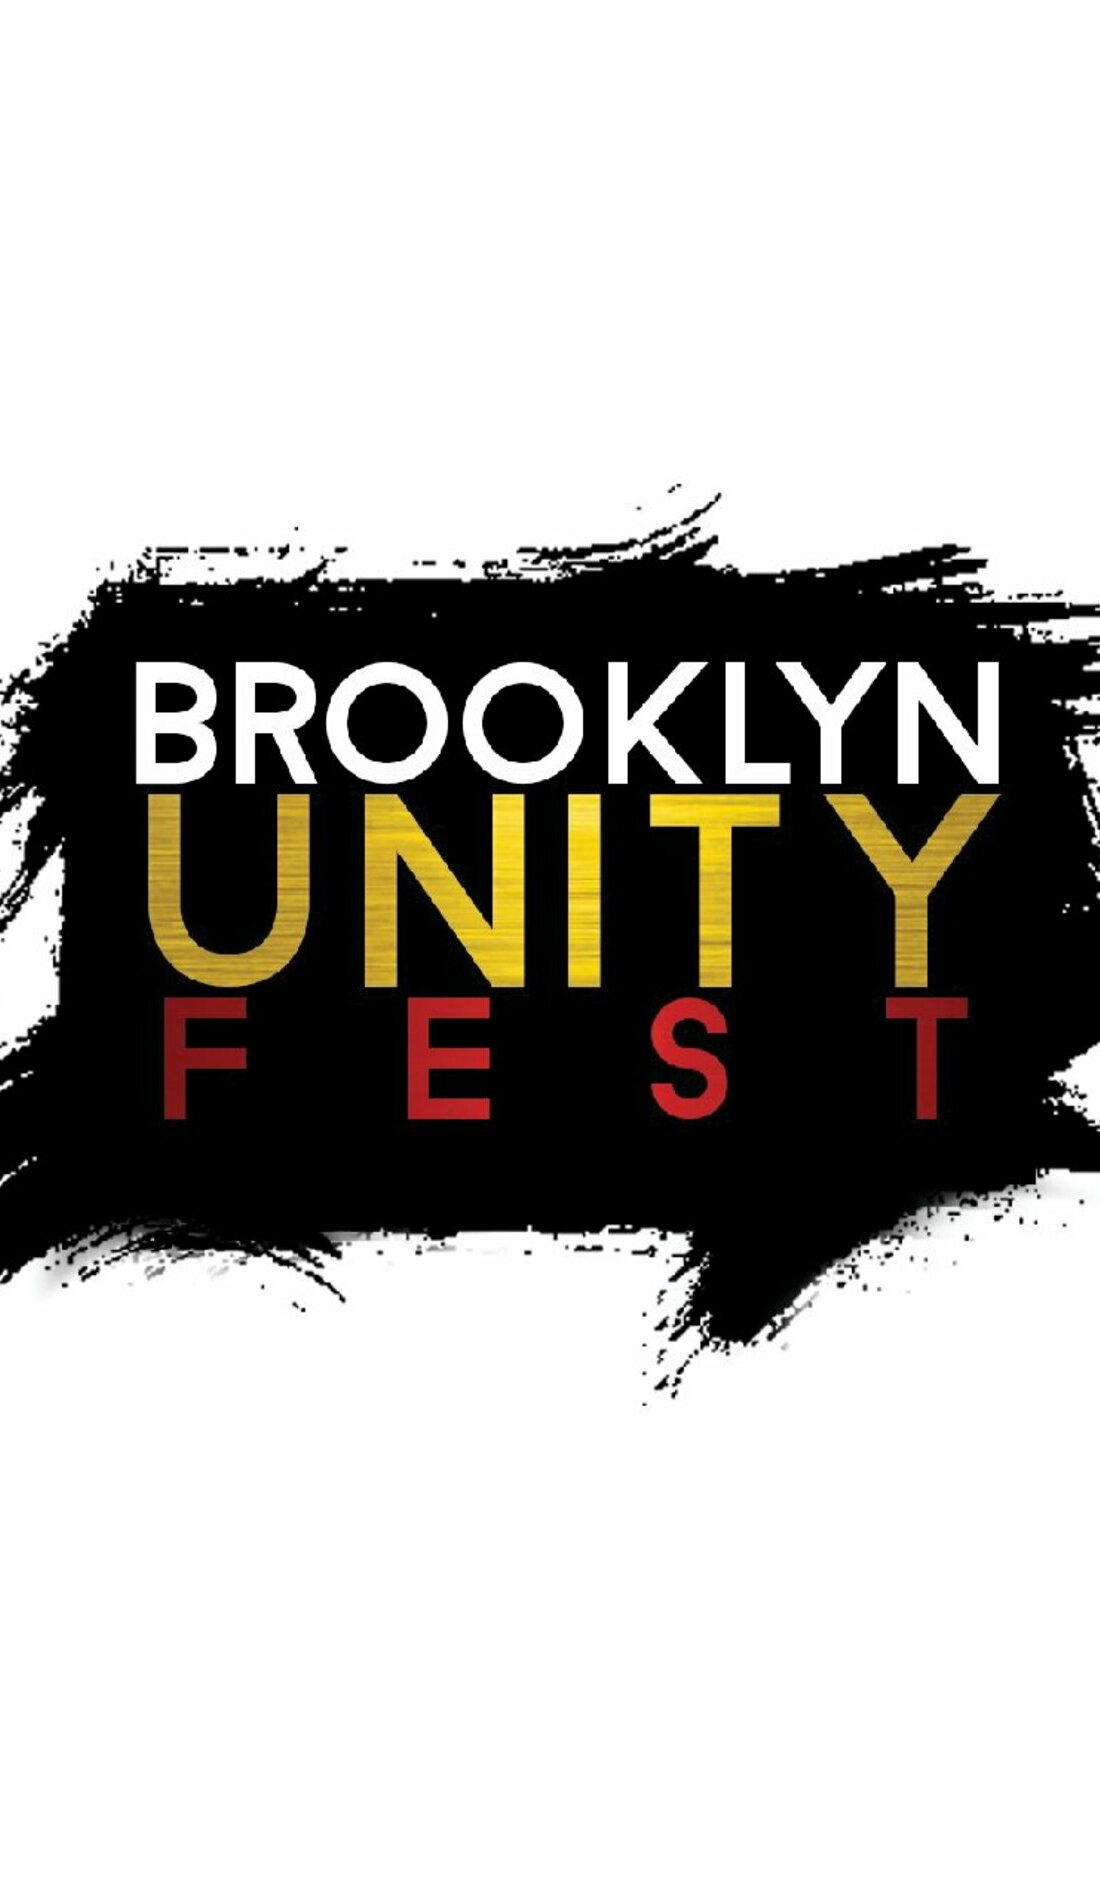 A Brooklyn Unity Fest live event